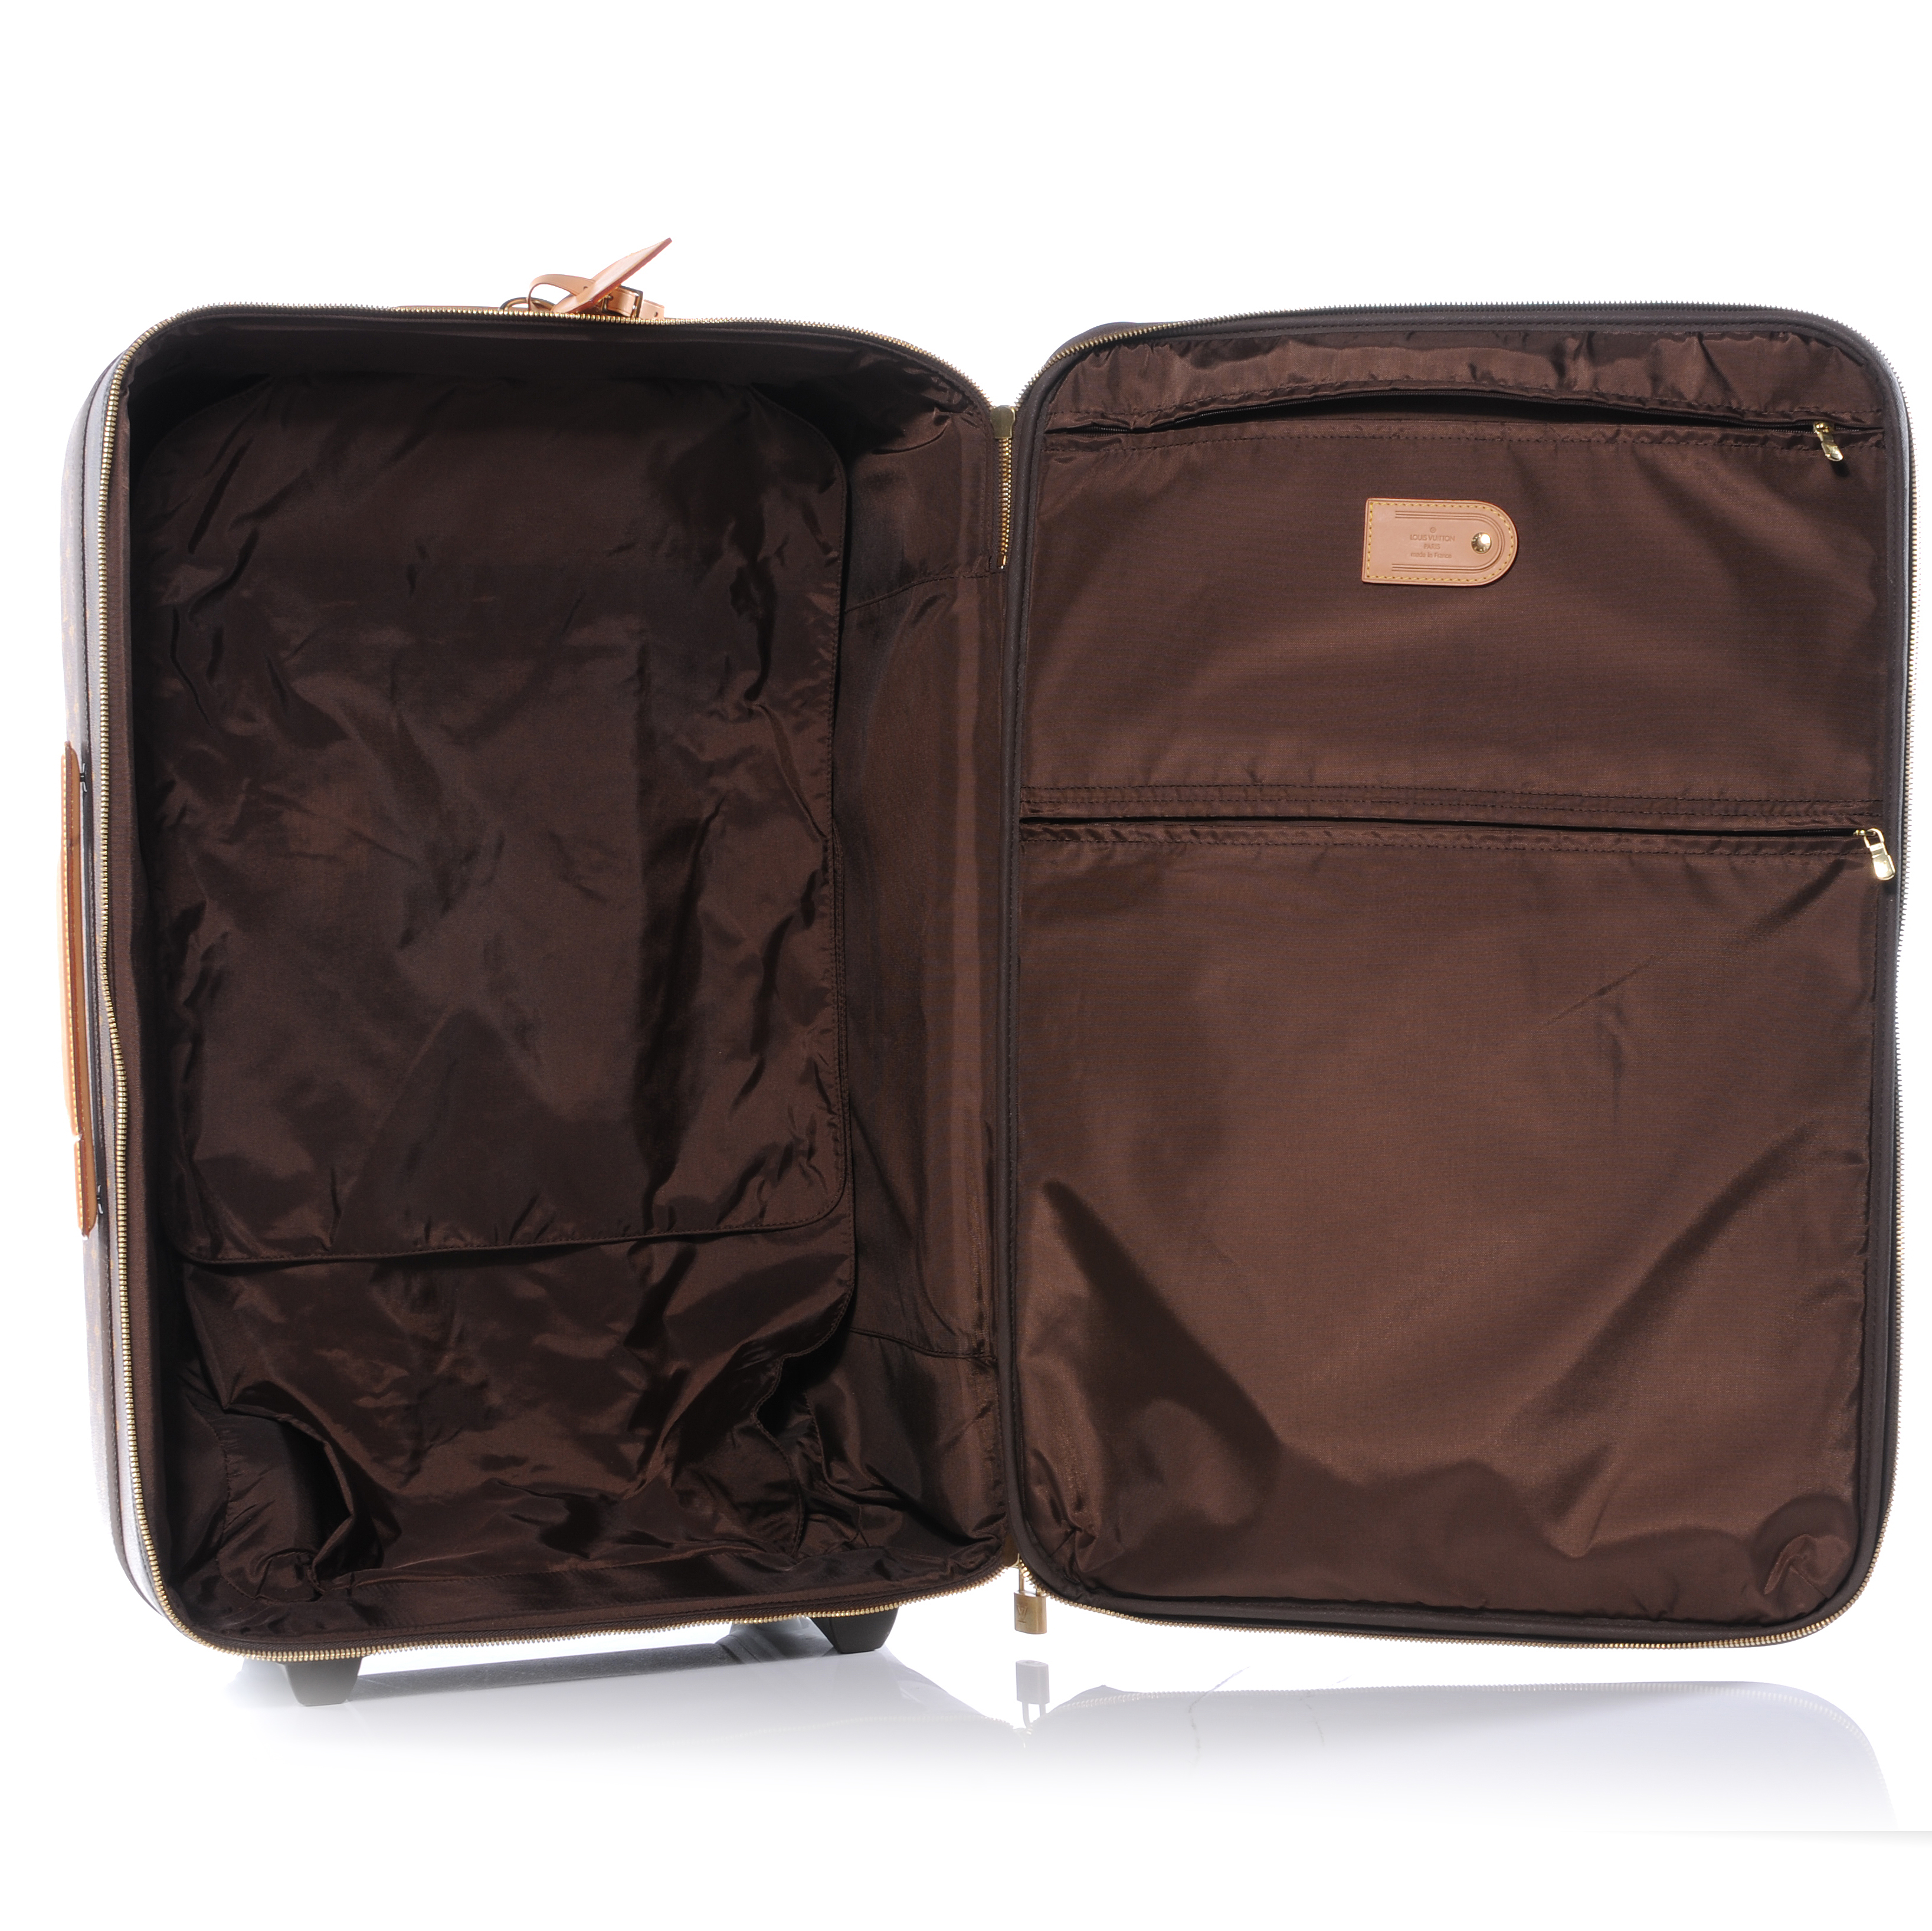 Sold at Auction: Louis Vuitton Luggage Trolley Pegase Legere 55